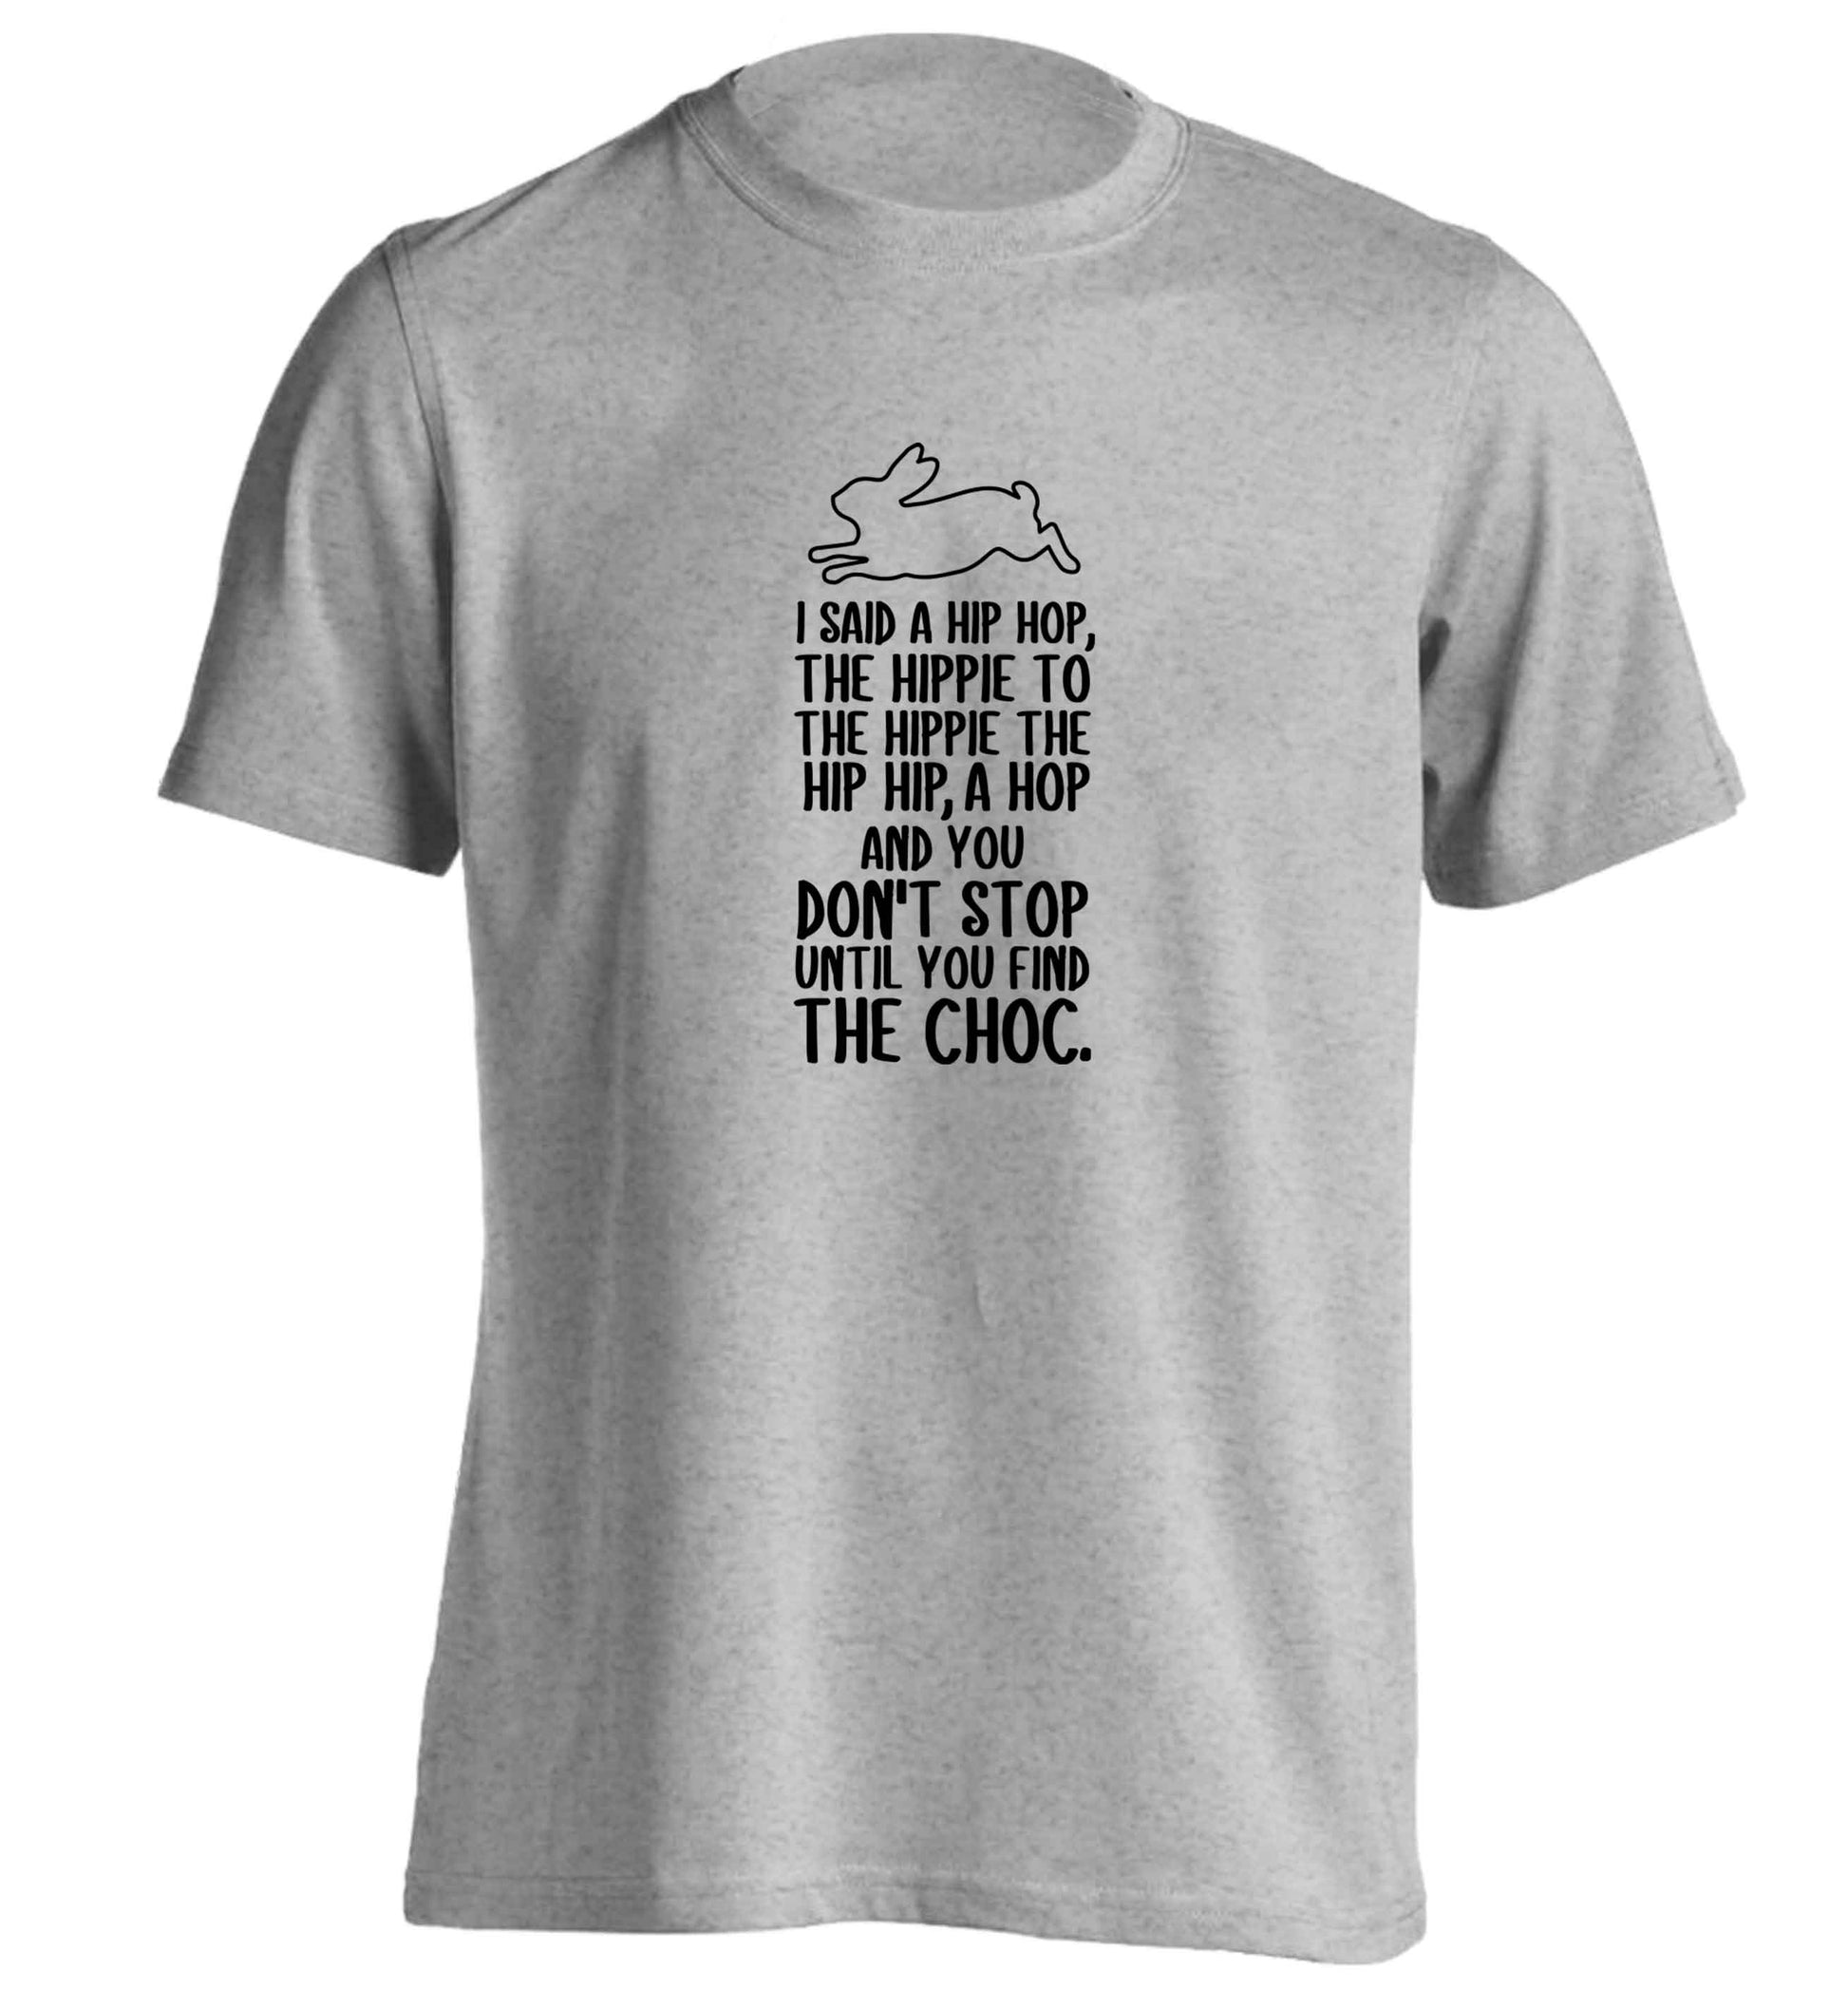 Don't stop until you find the choc adults unisex grey Tshirt 2XL